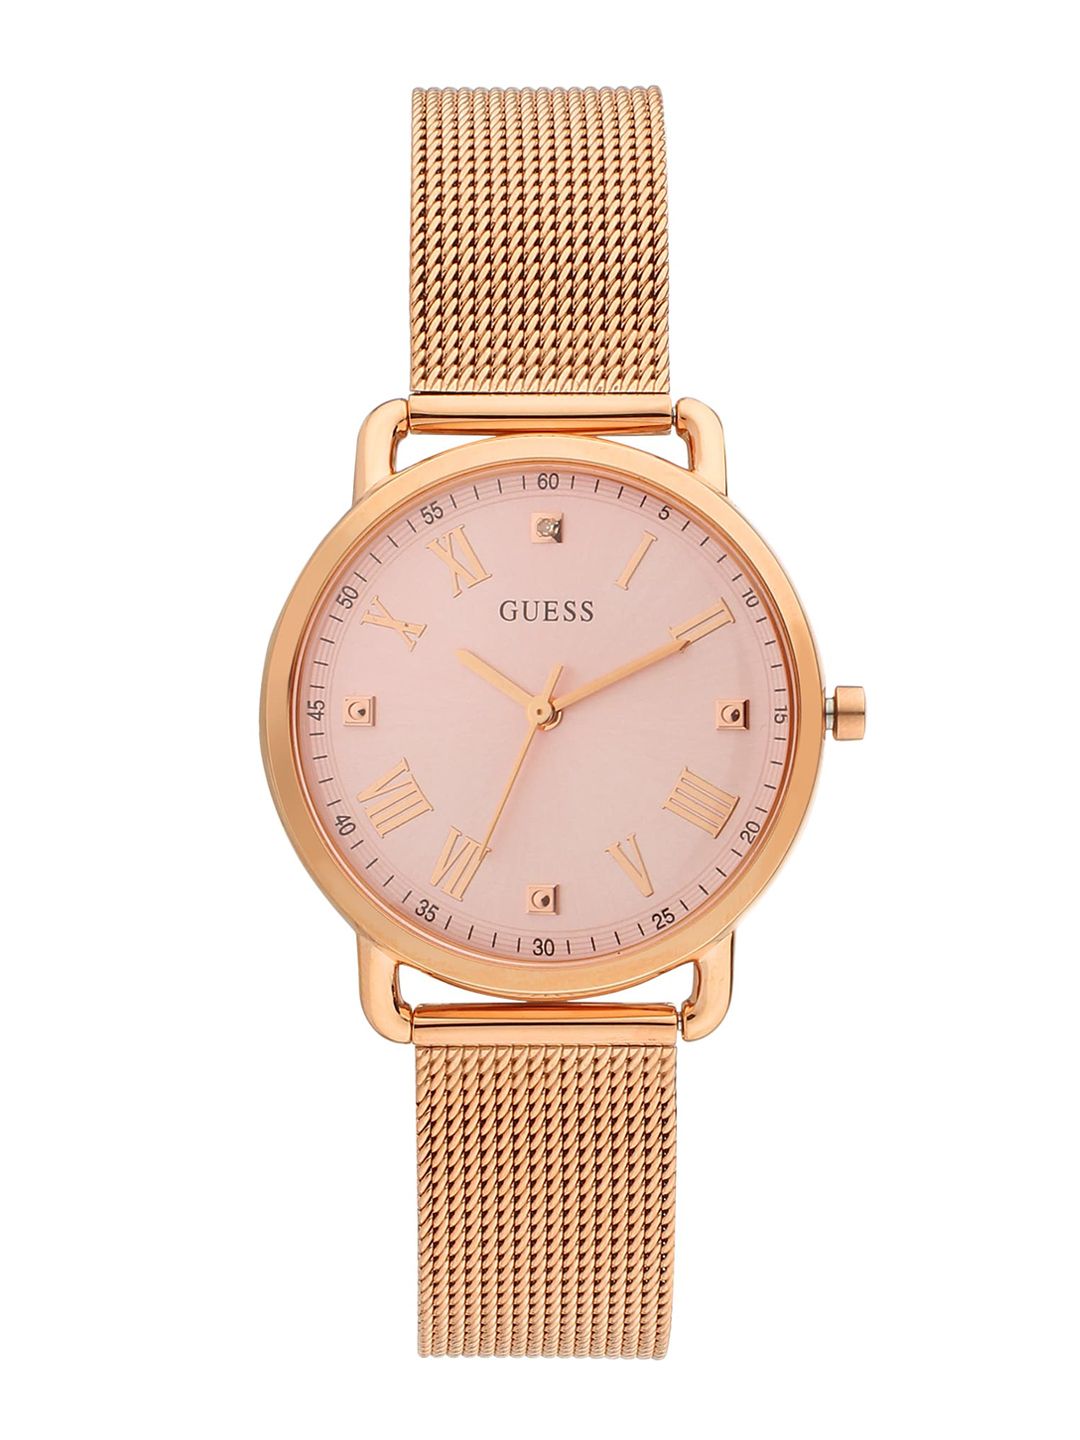 GUESS Women Rose Gold-Toned Embellished Dial Watch GW0031L3 Price in India